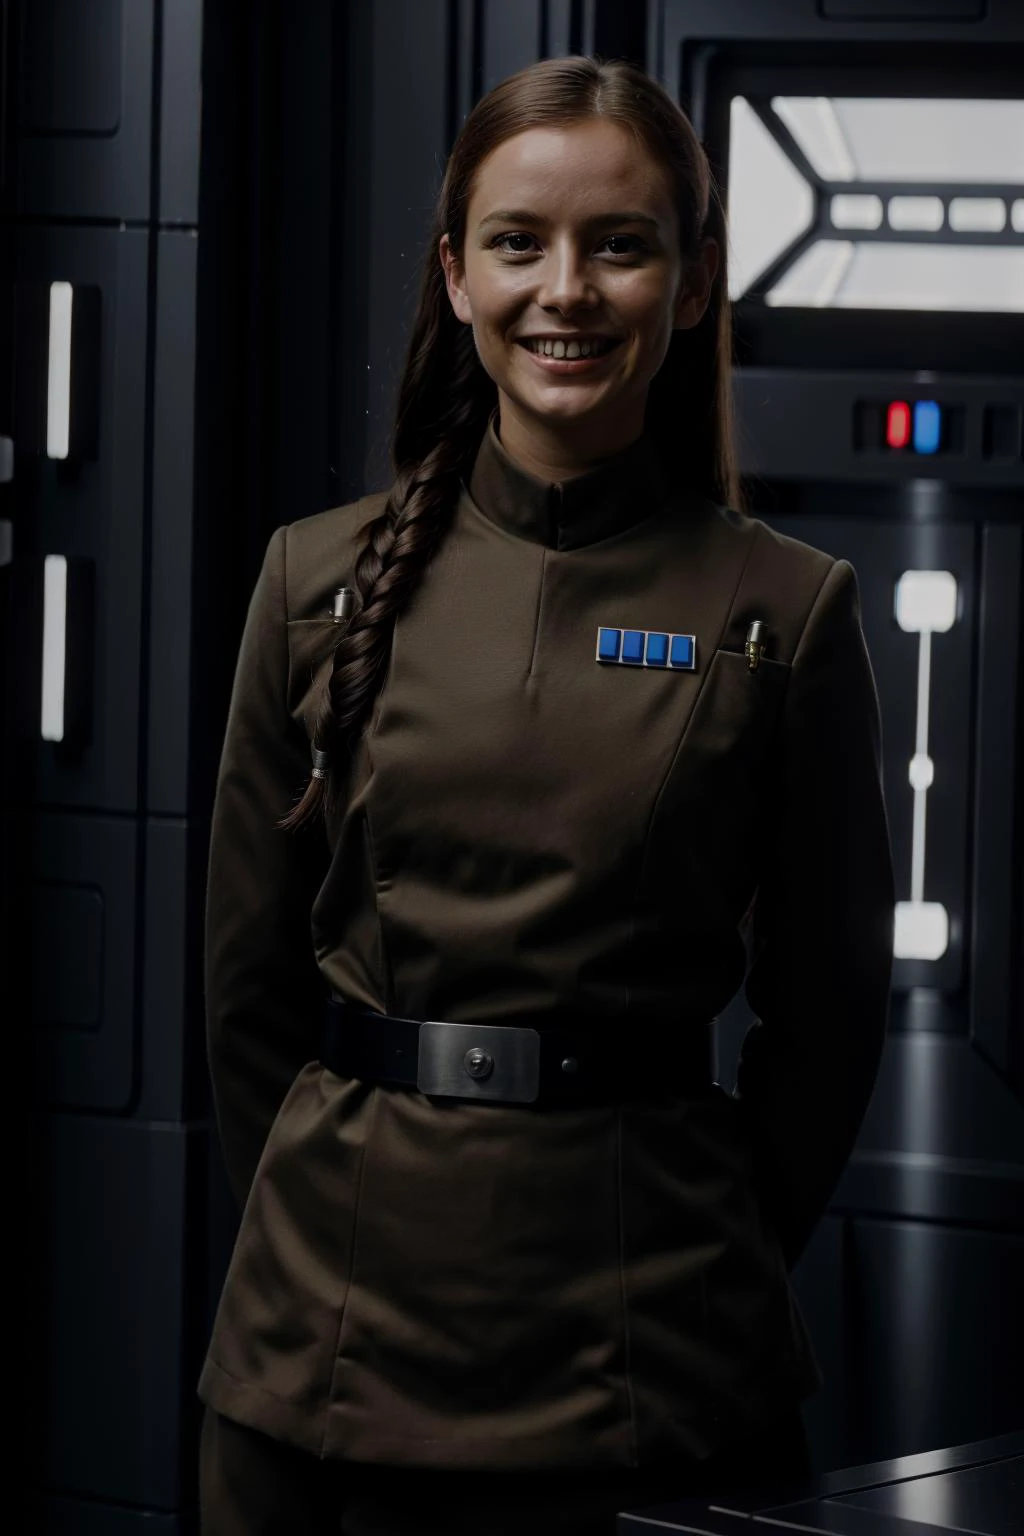 young woman with long hair in imperialofficer uniform smiling ,in a interrogation room, 8k uhd, dslr, soft lighting, high quality, film grain,masterpiece quality,Fujifilm 